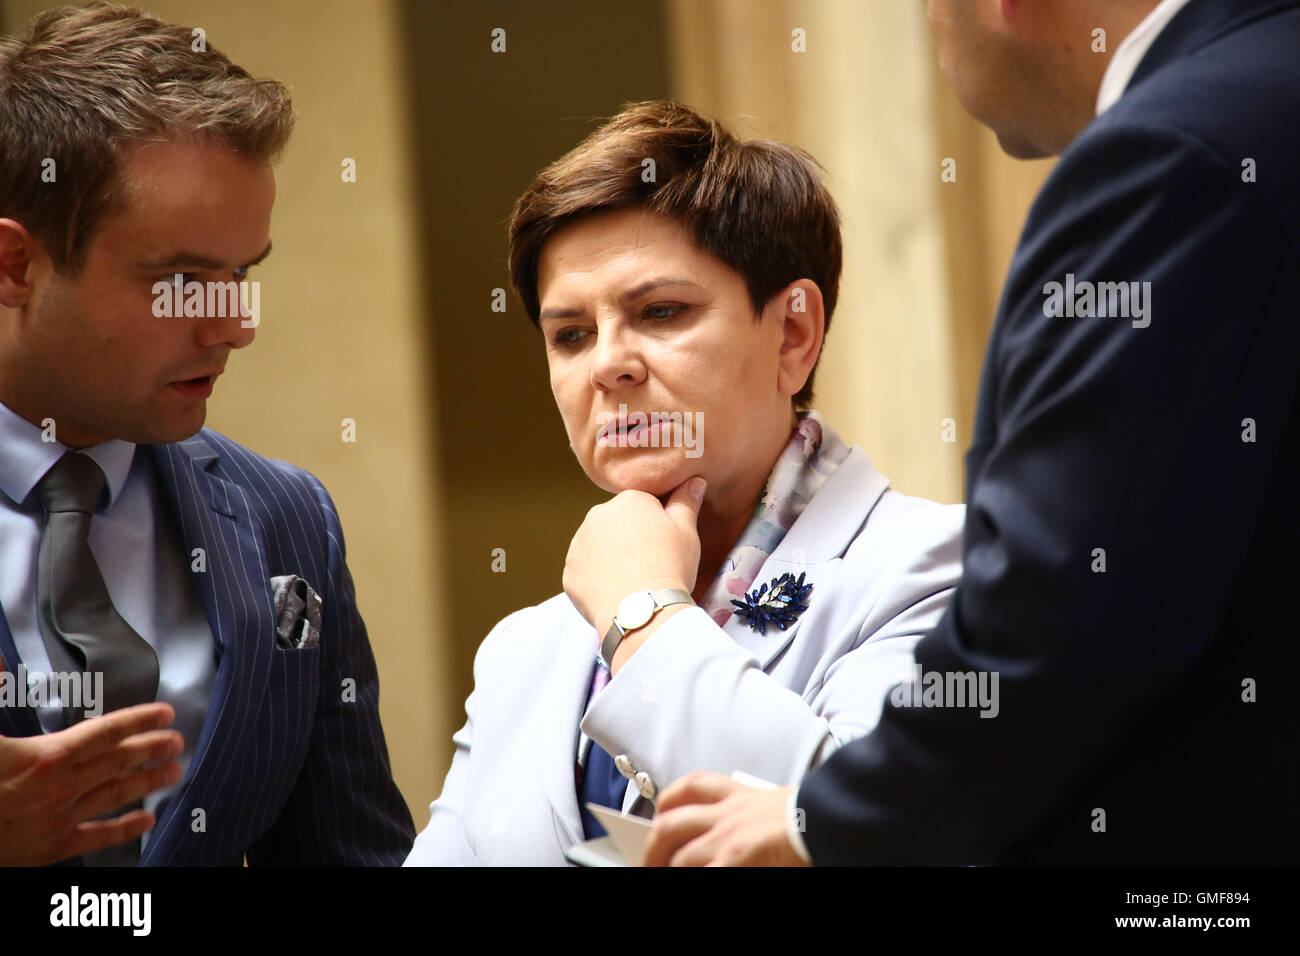 Warsaw, Poland. 26th August, 2016. Polish Prime Minister Beata Szydlo held official meeting with the German Chancellor Angela Merkel and the Visegrad Group. Primer of Hungary Viktor Orban, Czech Primer Bohuslav Sobotka and Slovakian Prime Minister Robert Fico took part in talkings. Credit:  Jake Ratz/Alamy Live News Stock Photo